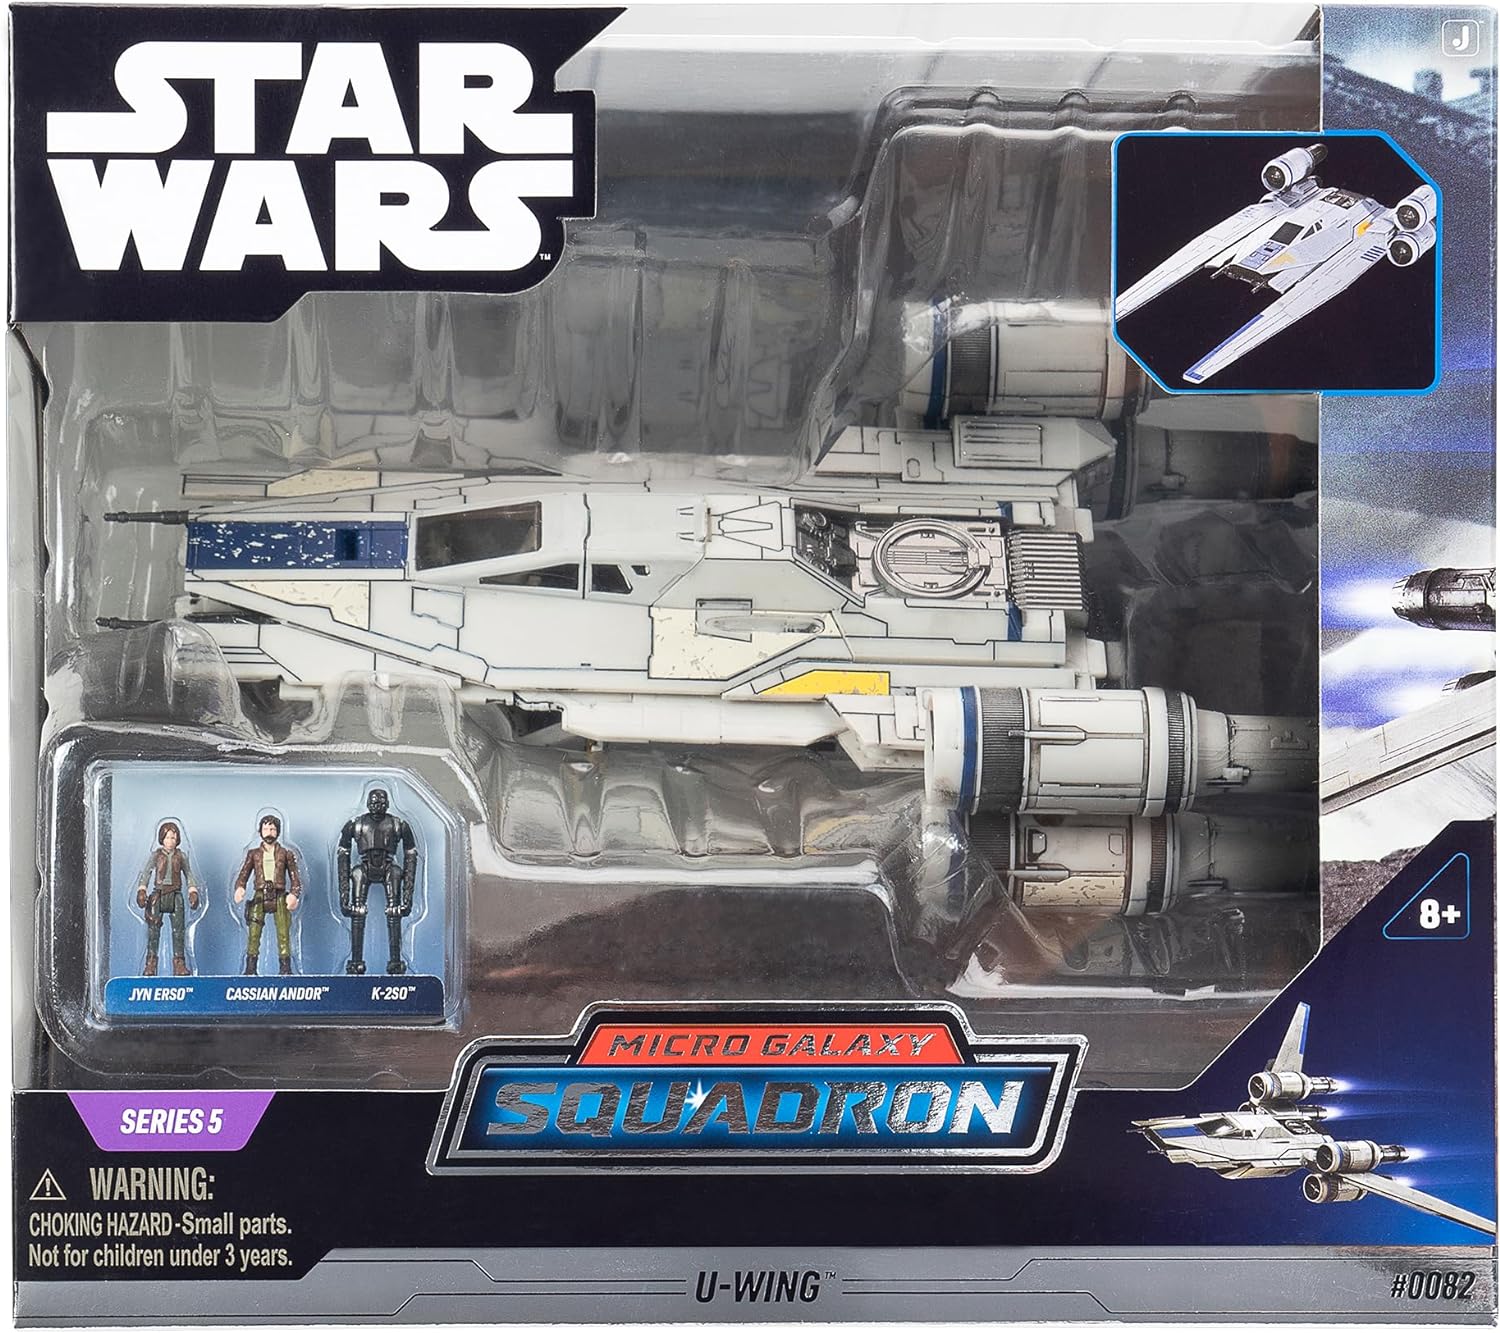 Star Wars Micro Galaxy Squadron line of vehicles from Jazwares Visual Guide